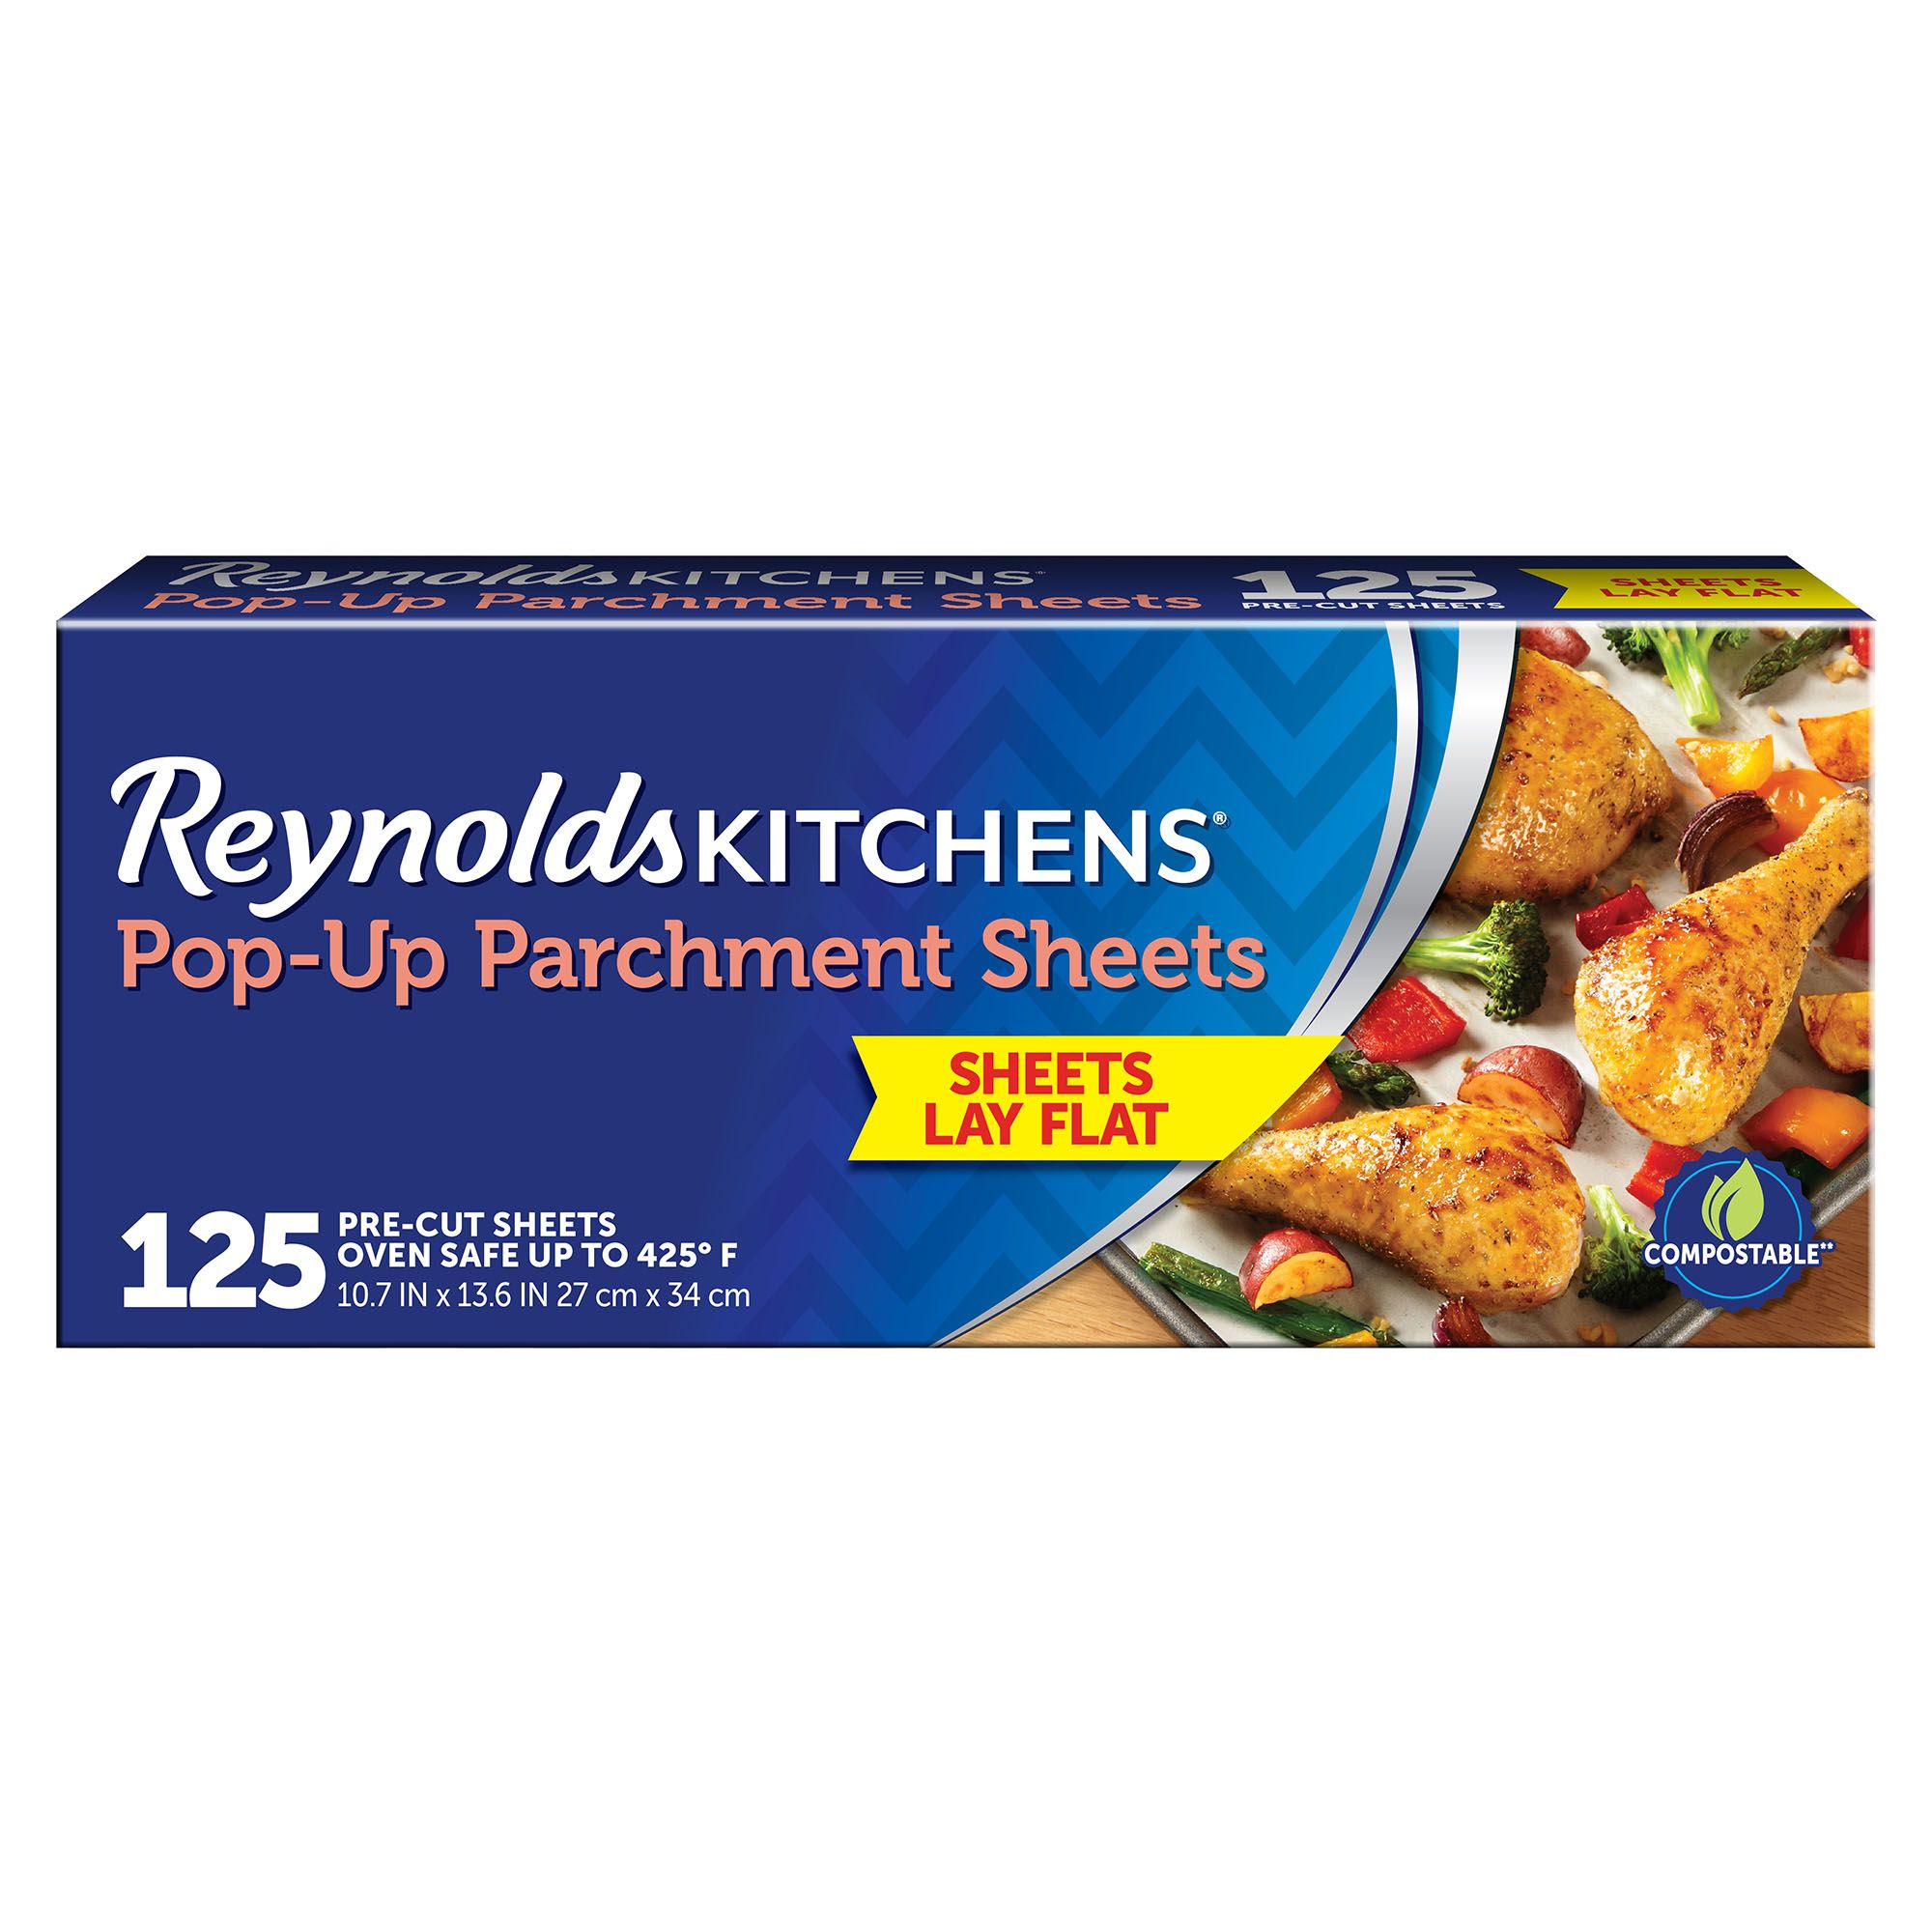 Reynolds Parchment Paper Coupon Without A Download - Colaboratory